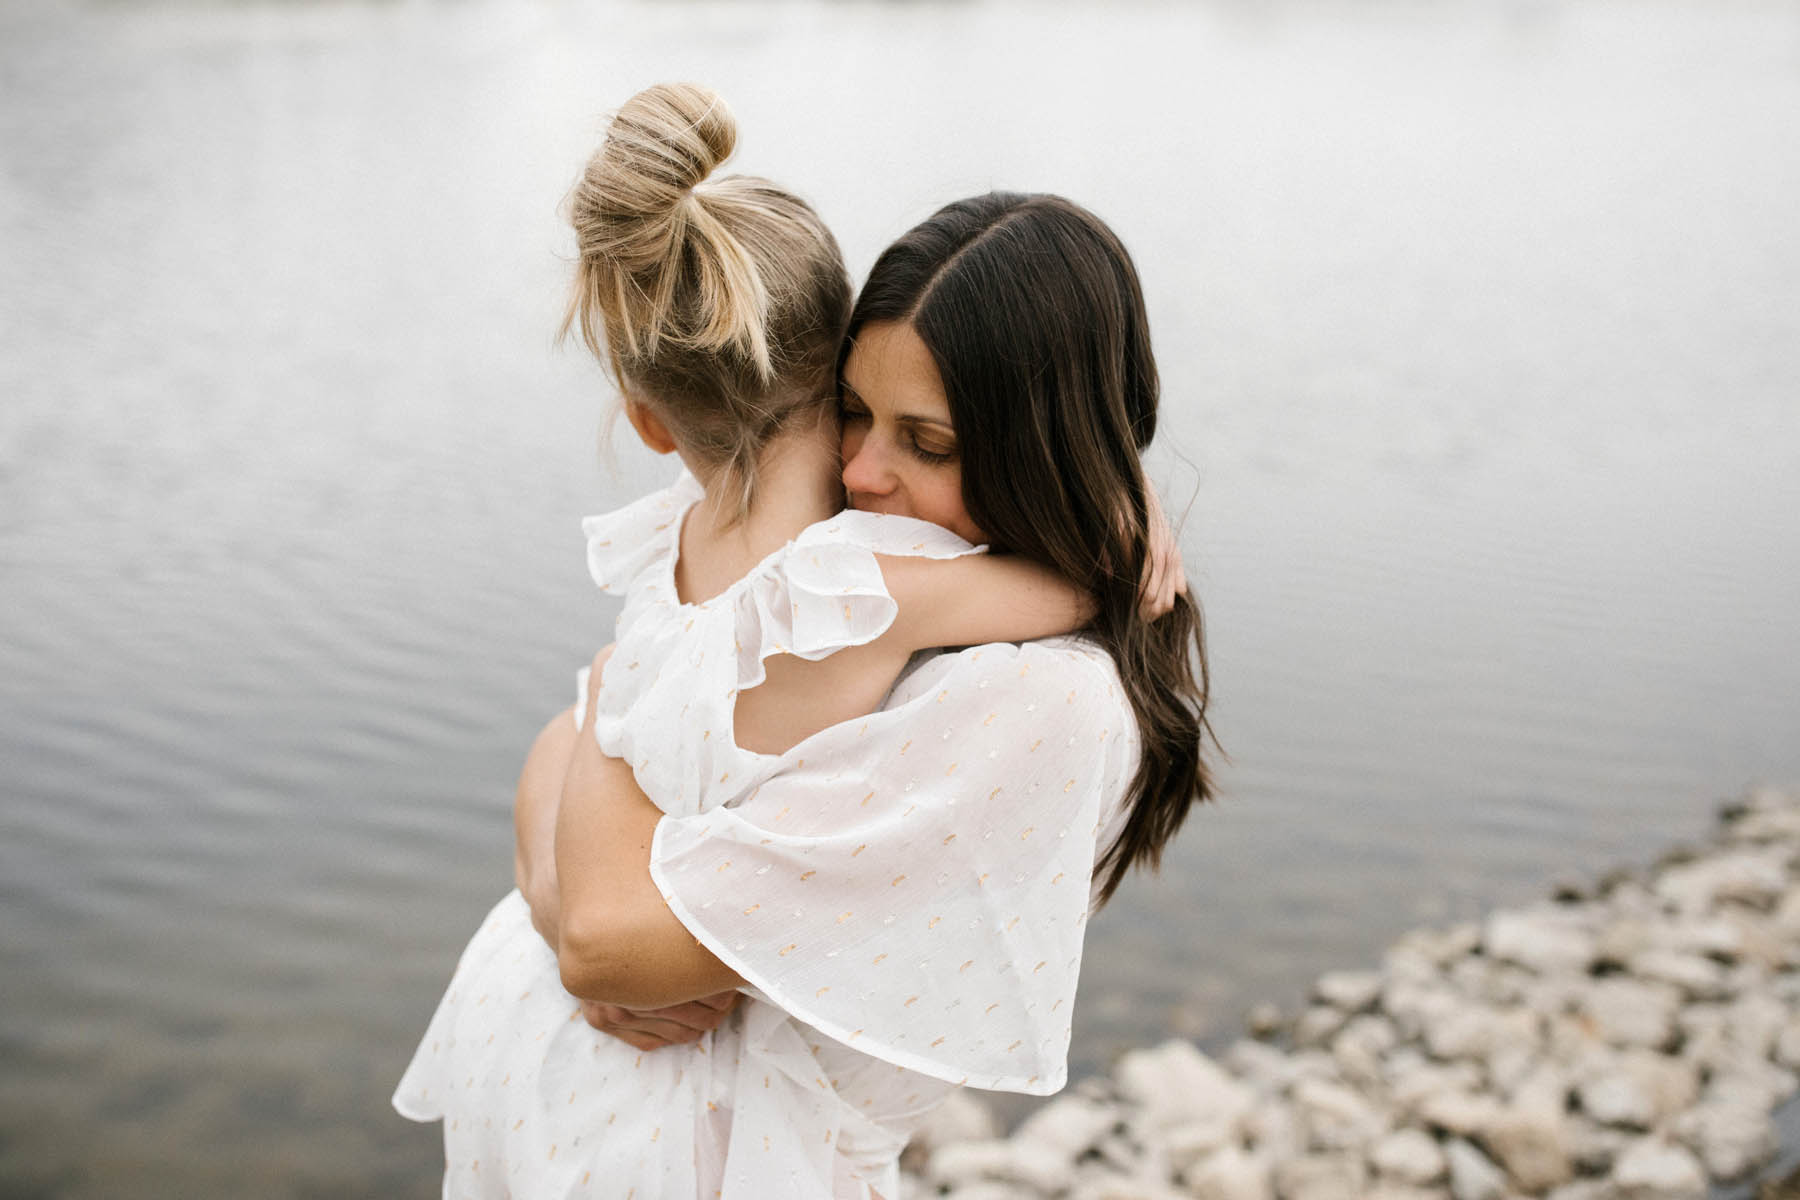 New Lenox Photographer Laurie Baker captures mother and daughter hugging by a pond